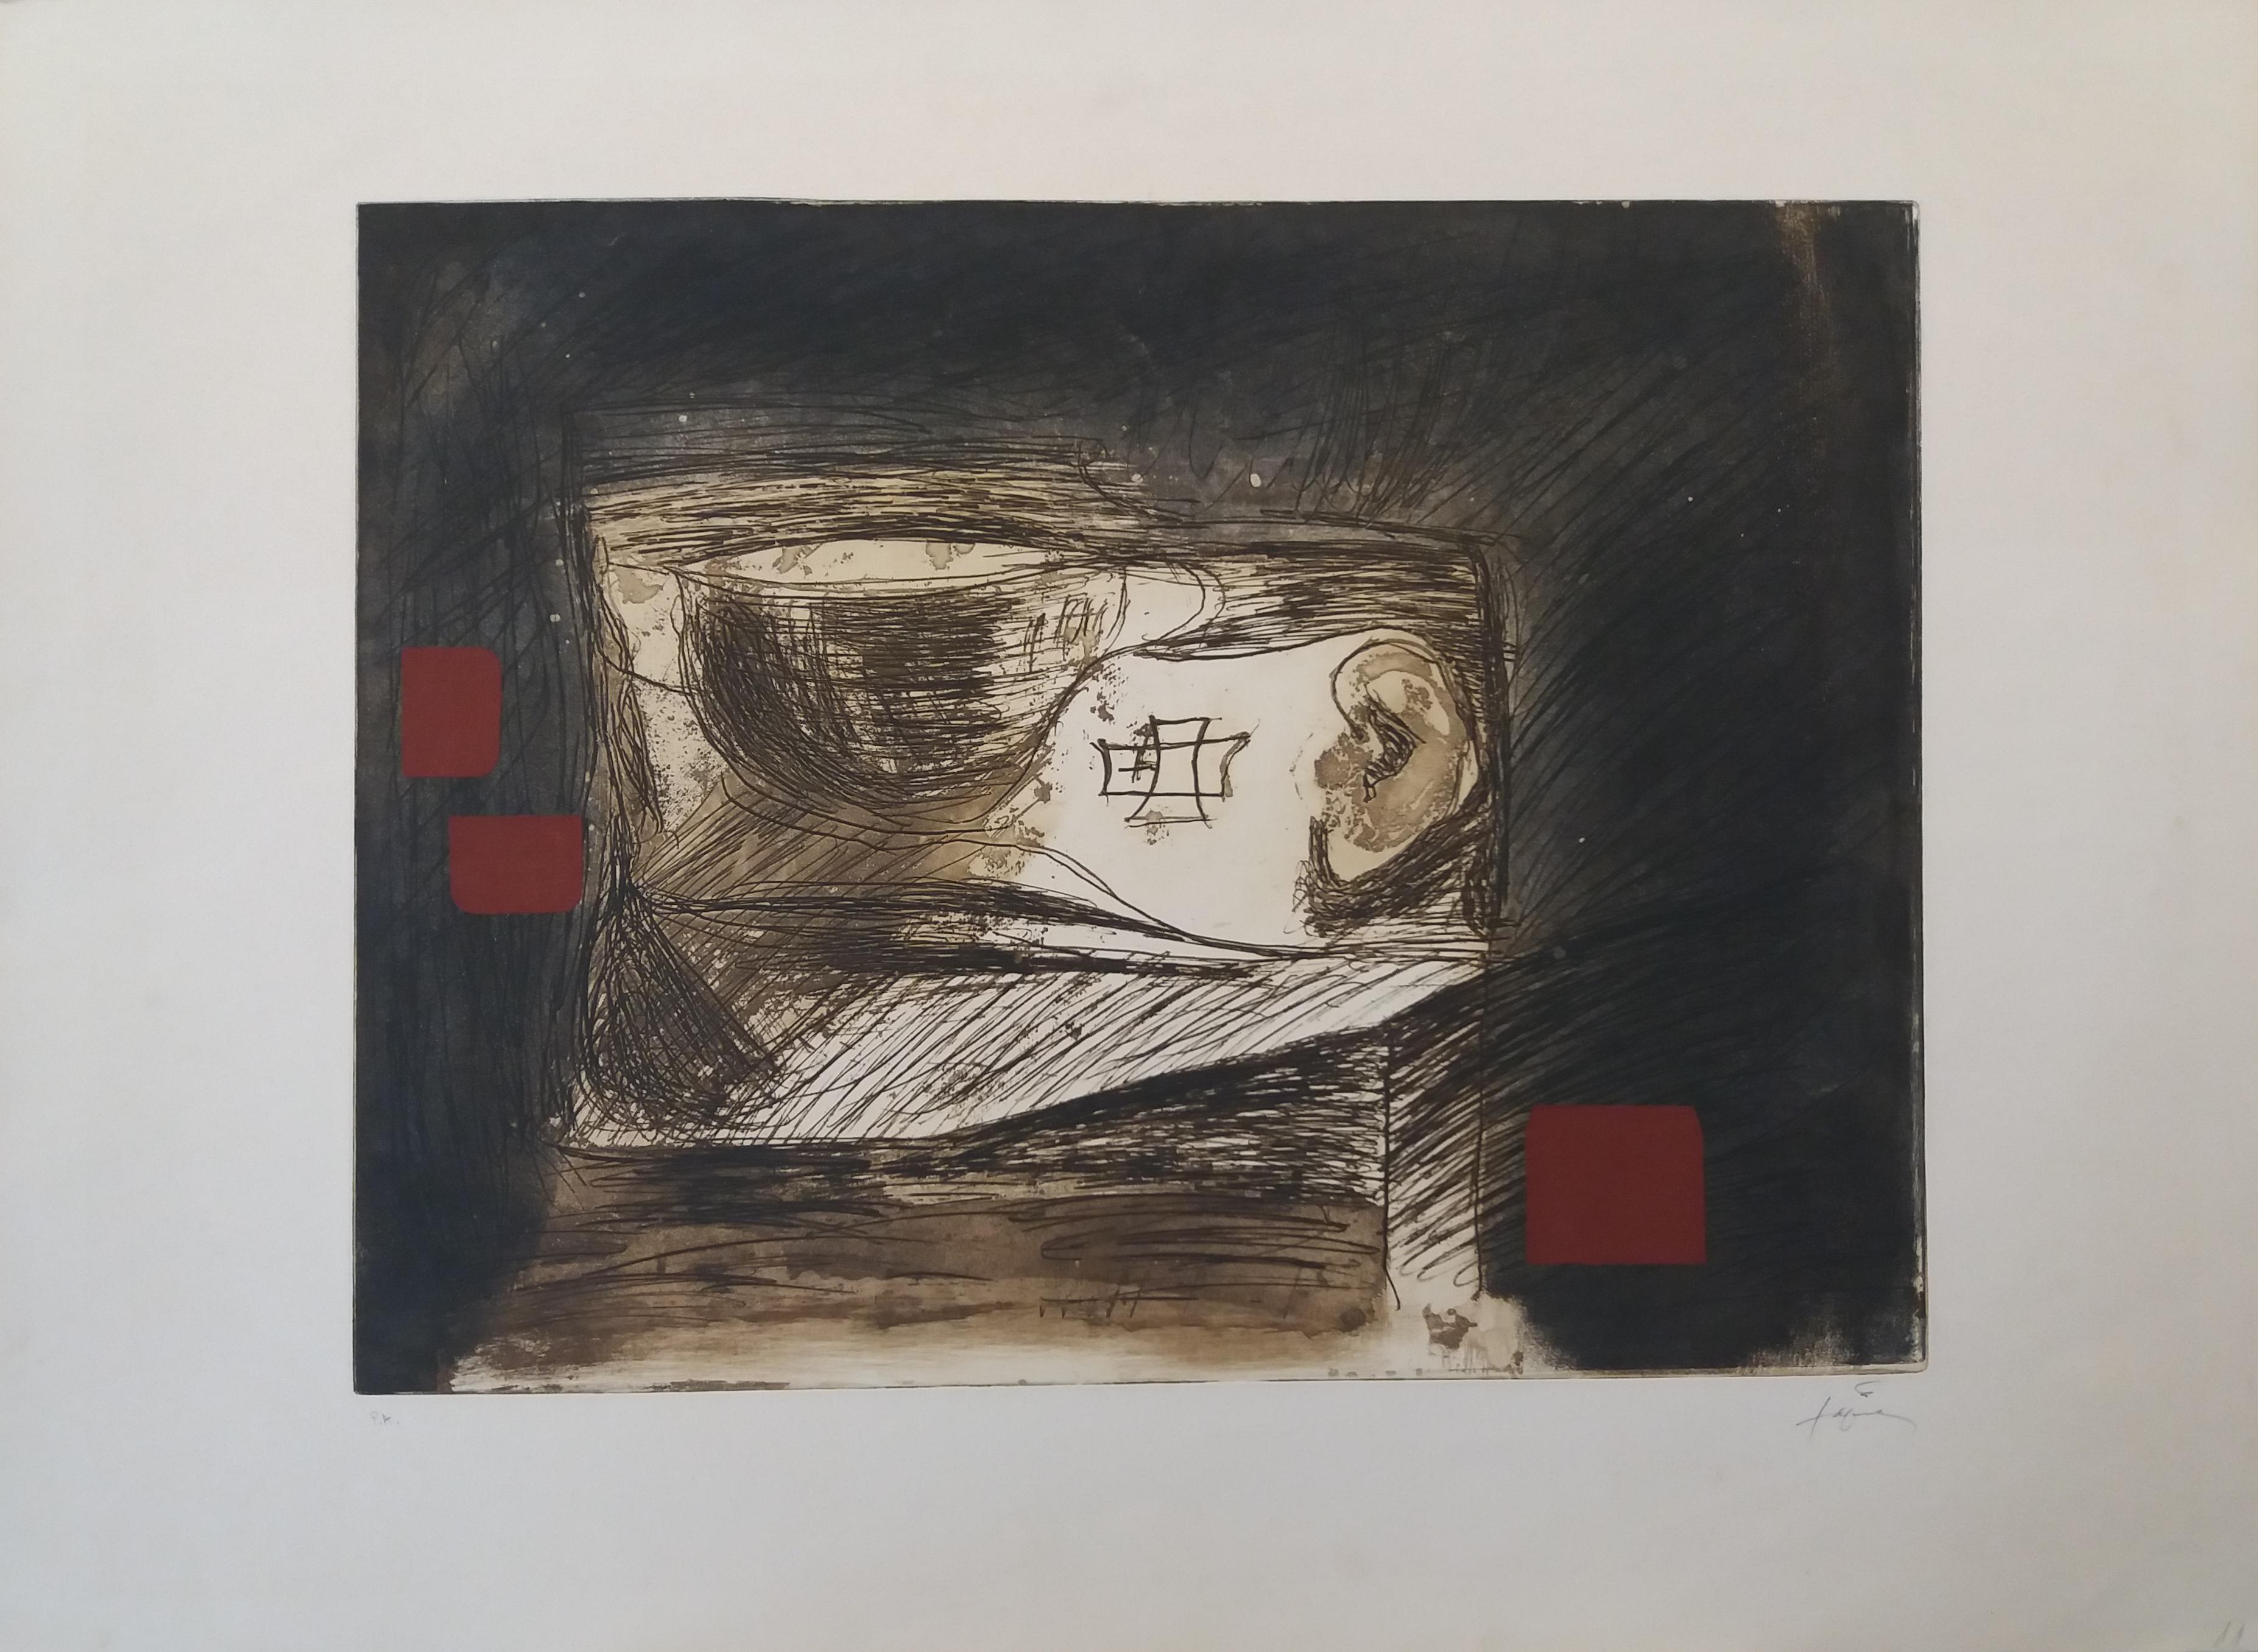 LLull i Tapies original engraving painting - Black Abstract Print by Antoni Tàpies